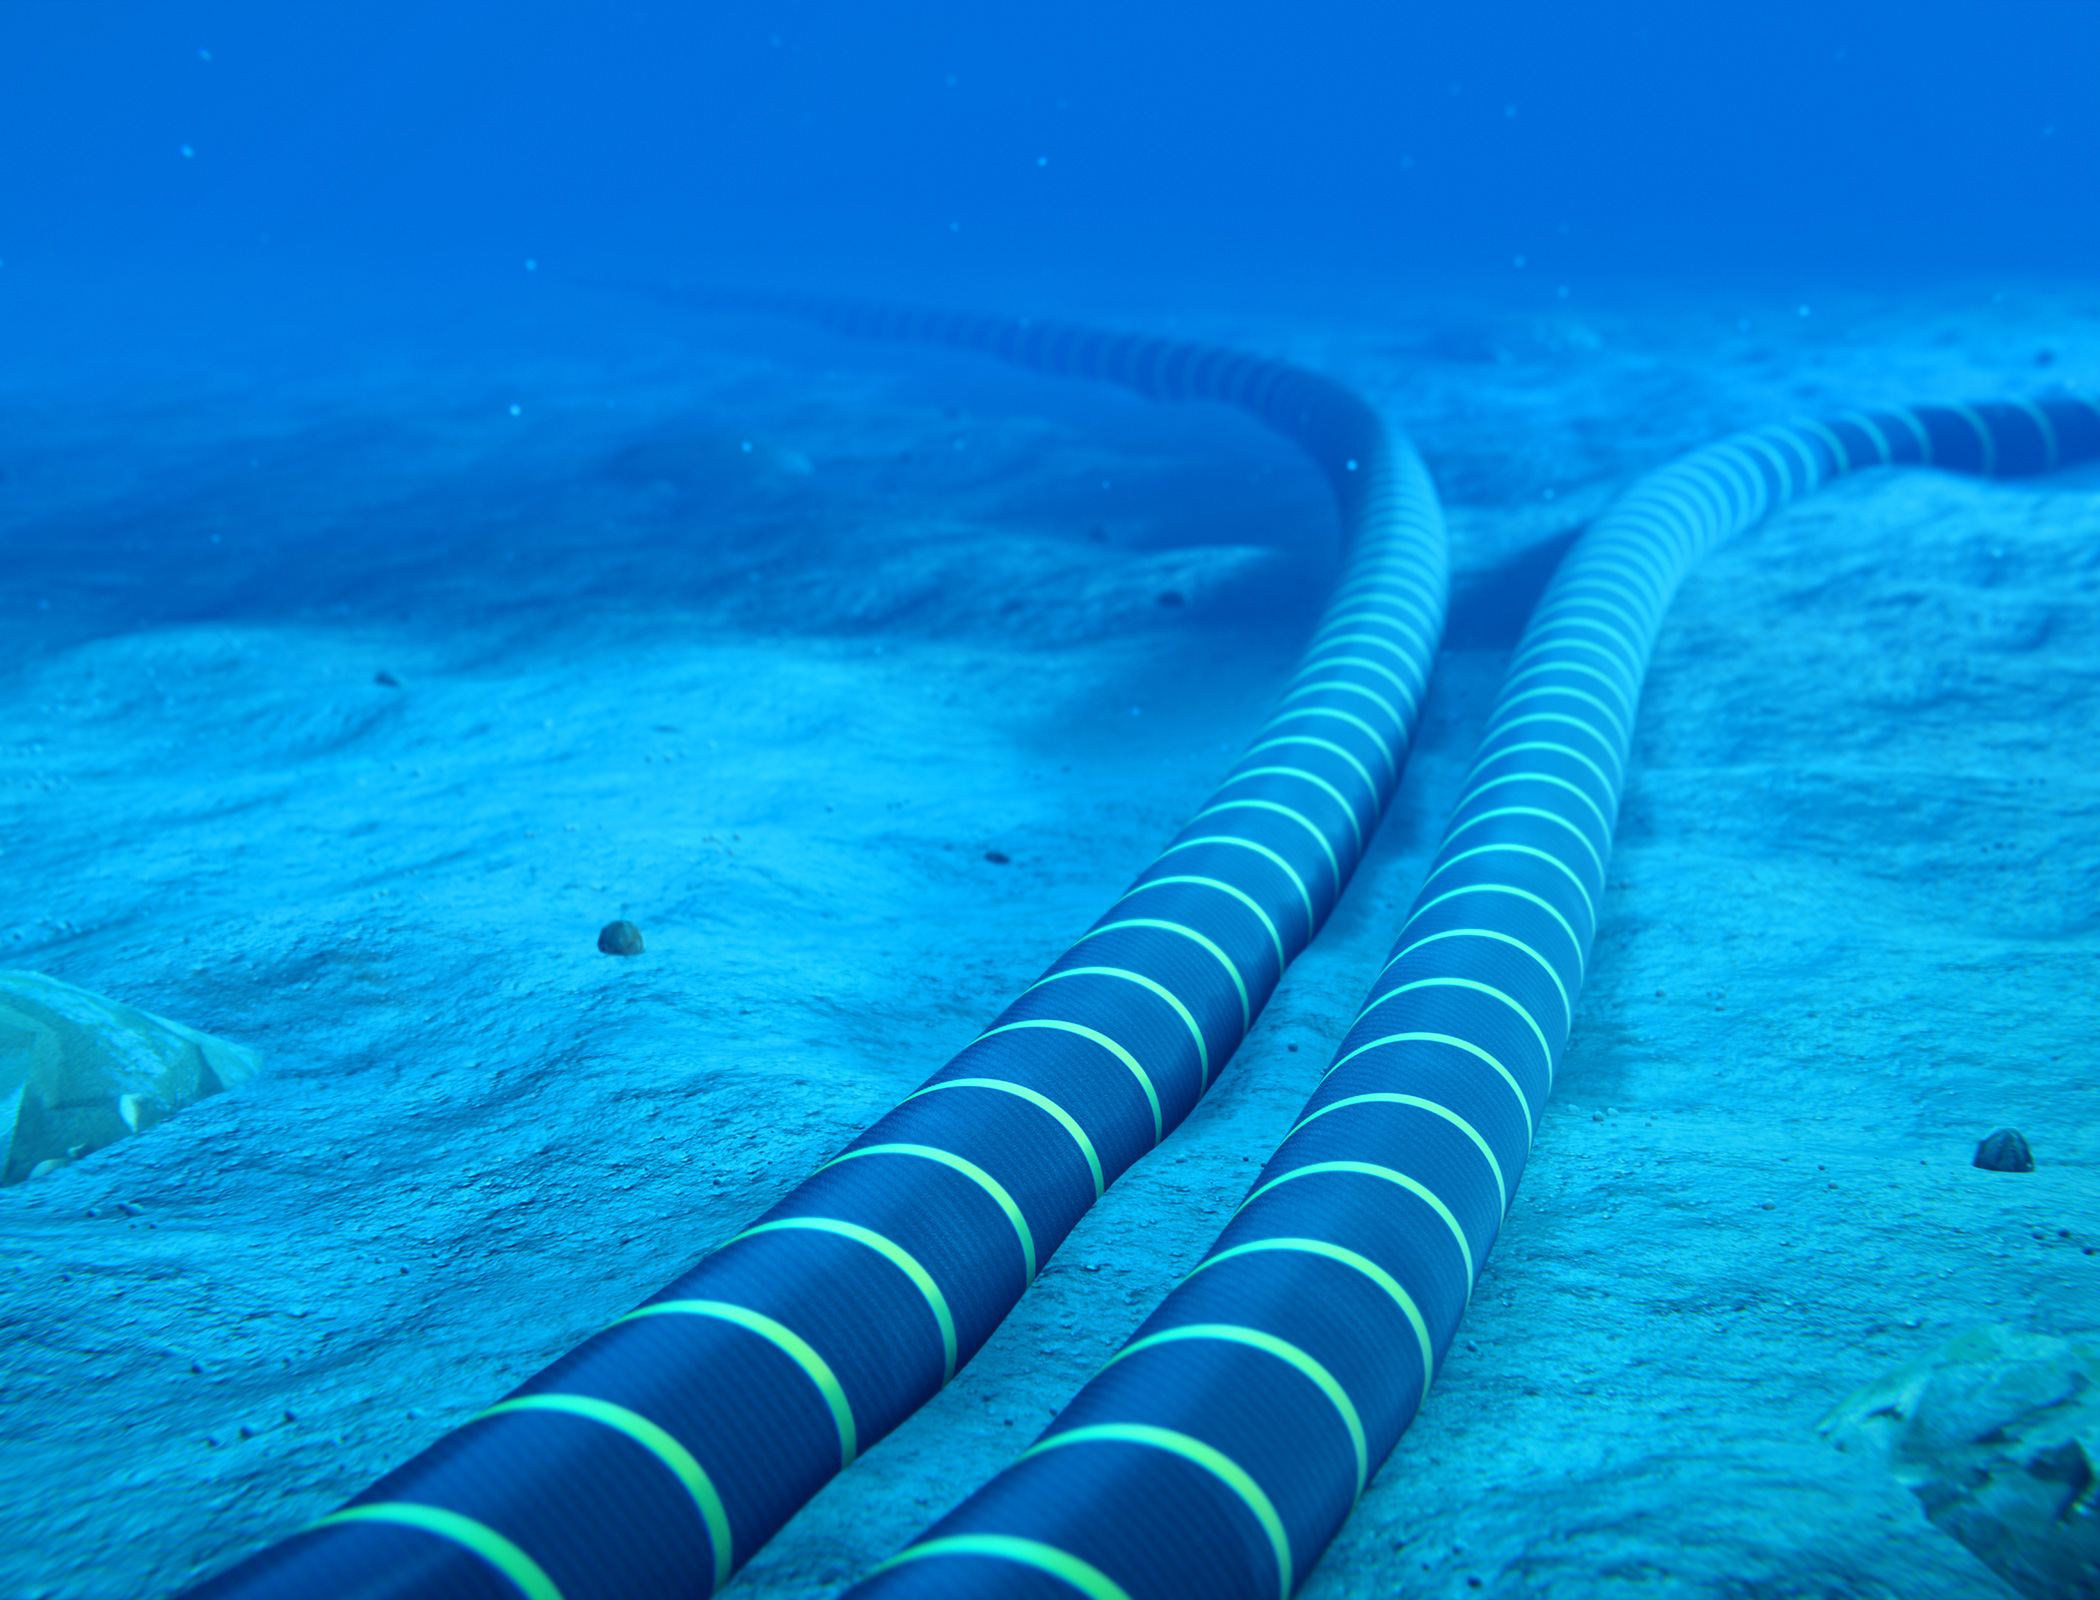 US committee urges FCC to block Cuba undersea cable project